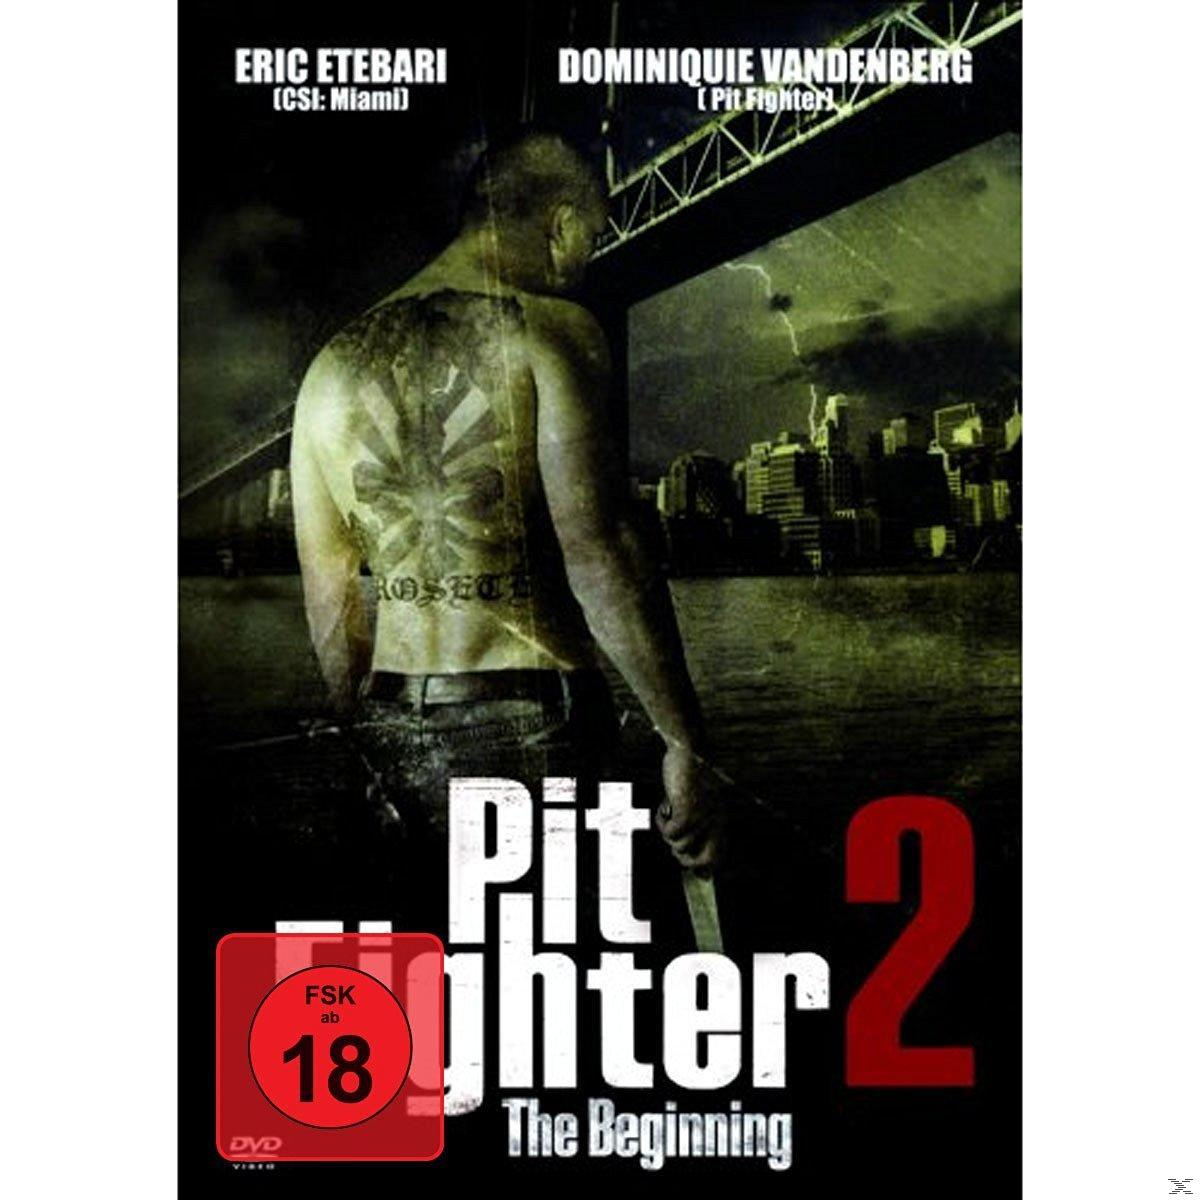 Fighter DVD The Beginning Pit 2